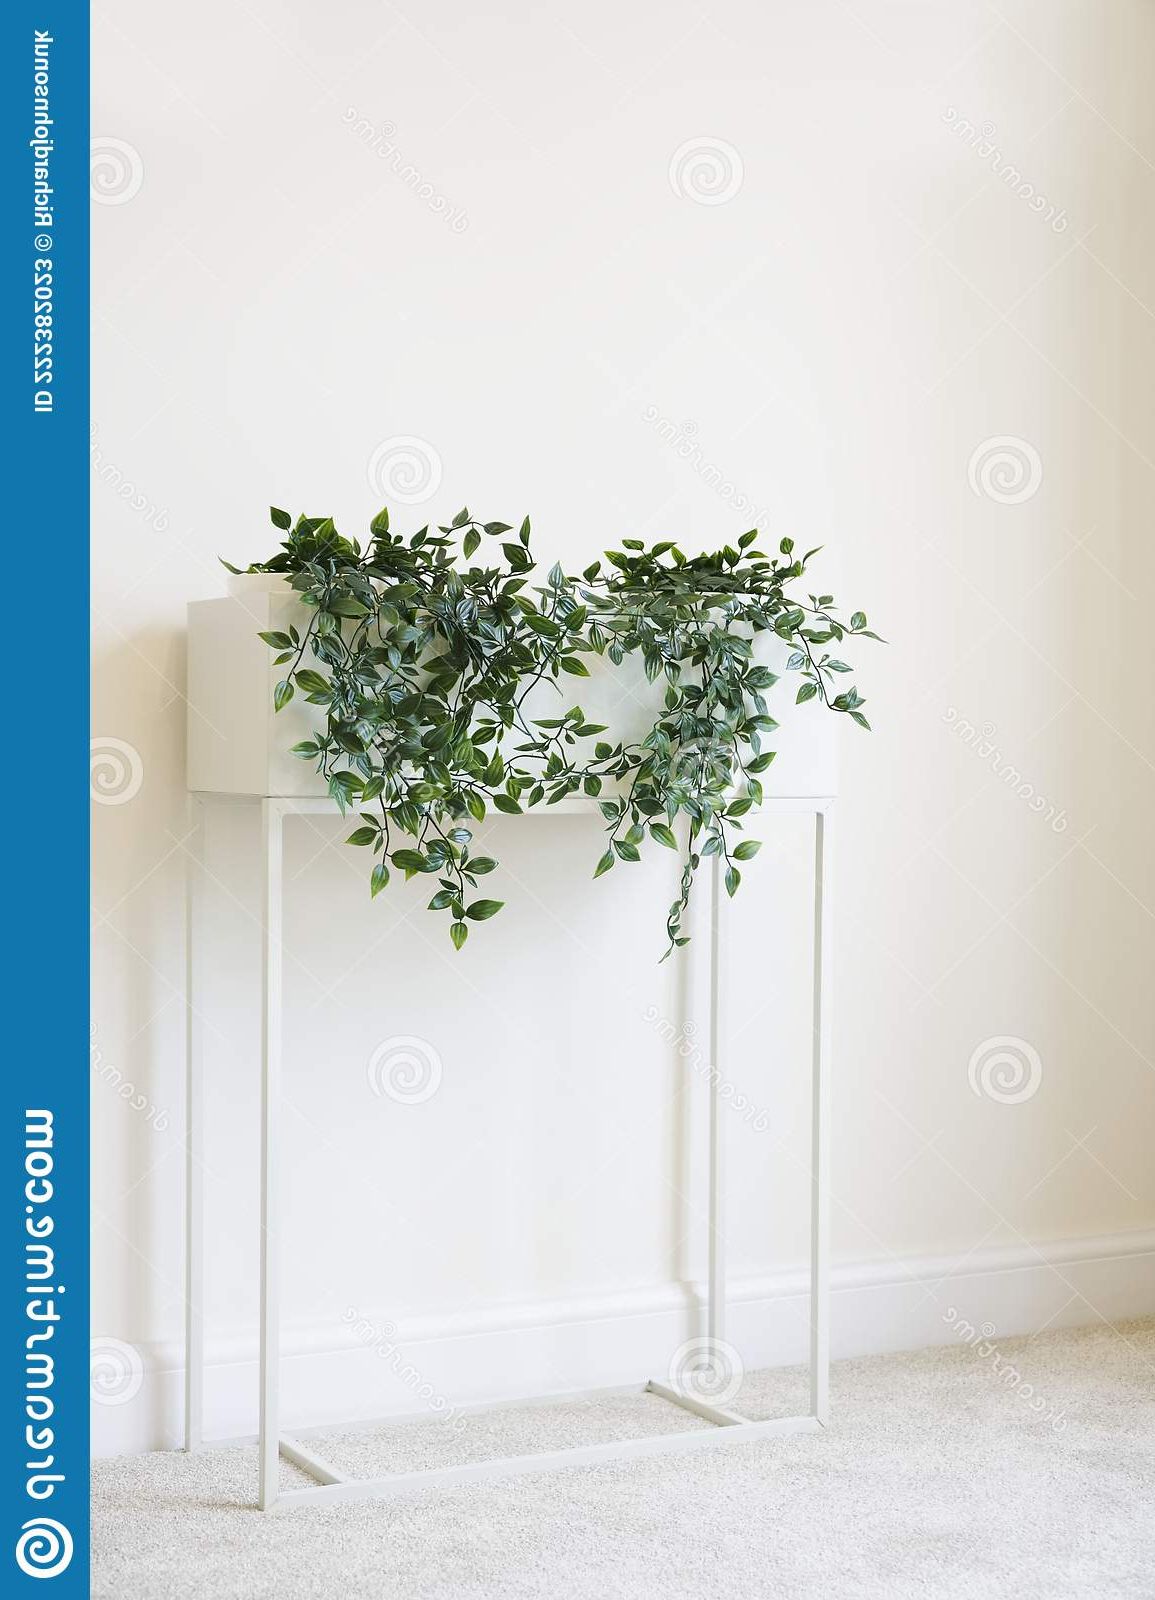 Ivy Green Plant In White Plant Stand And Neutral Decor Home Stock Image –  Image Of Wall, Exotic: 222382023 With Regard To Current Ivory Plant Stands (View 11 of 15)